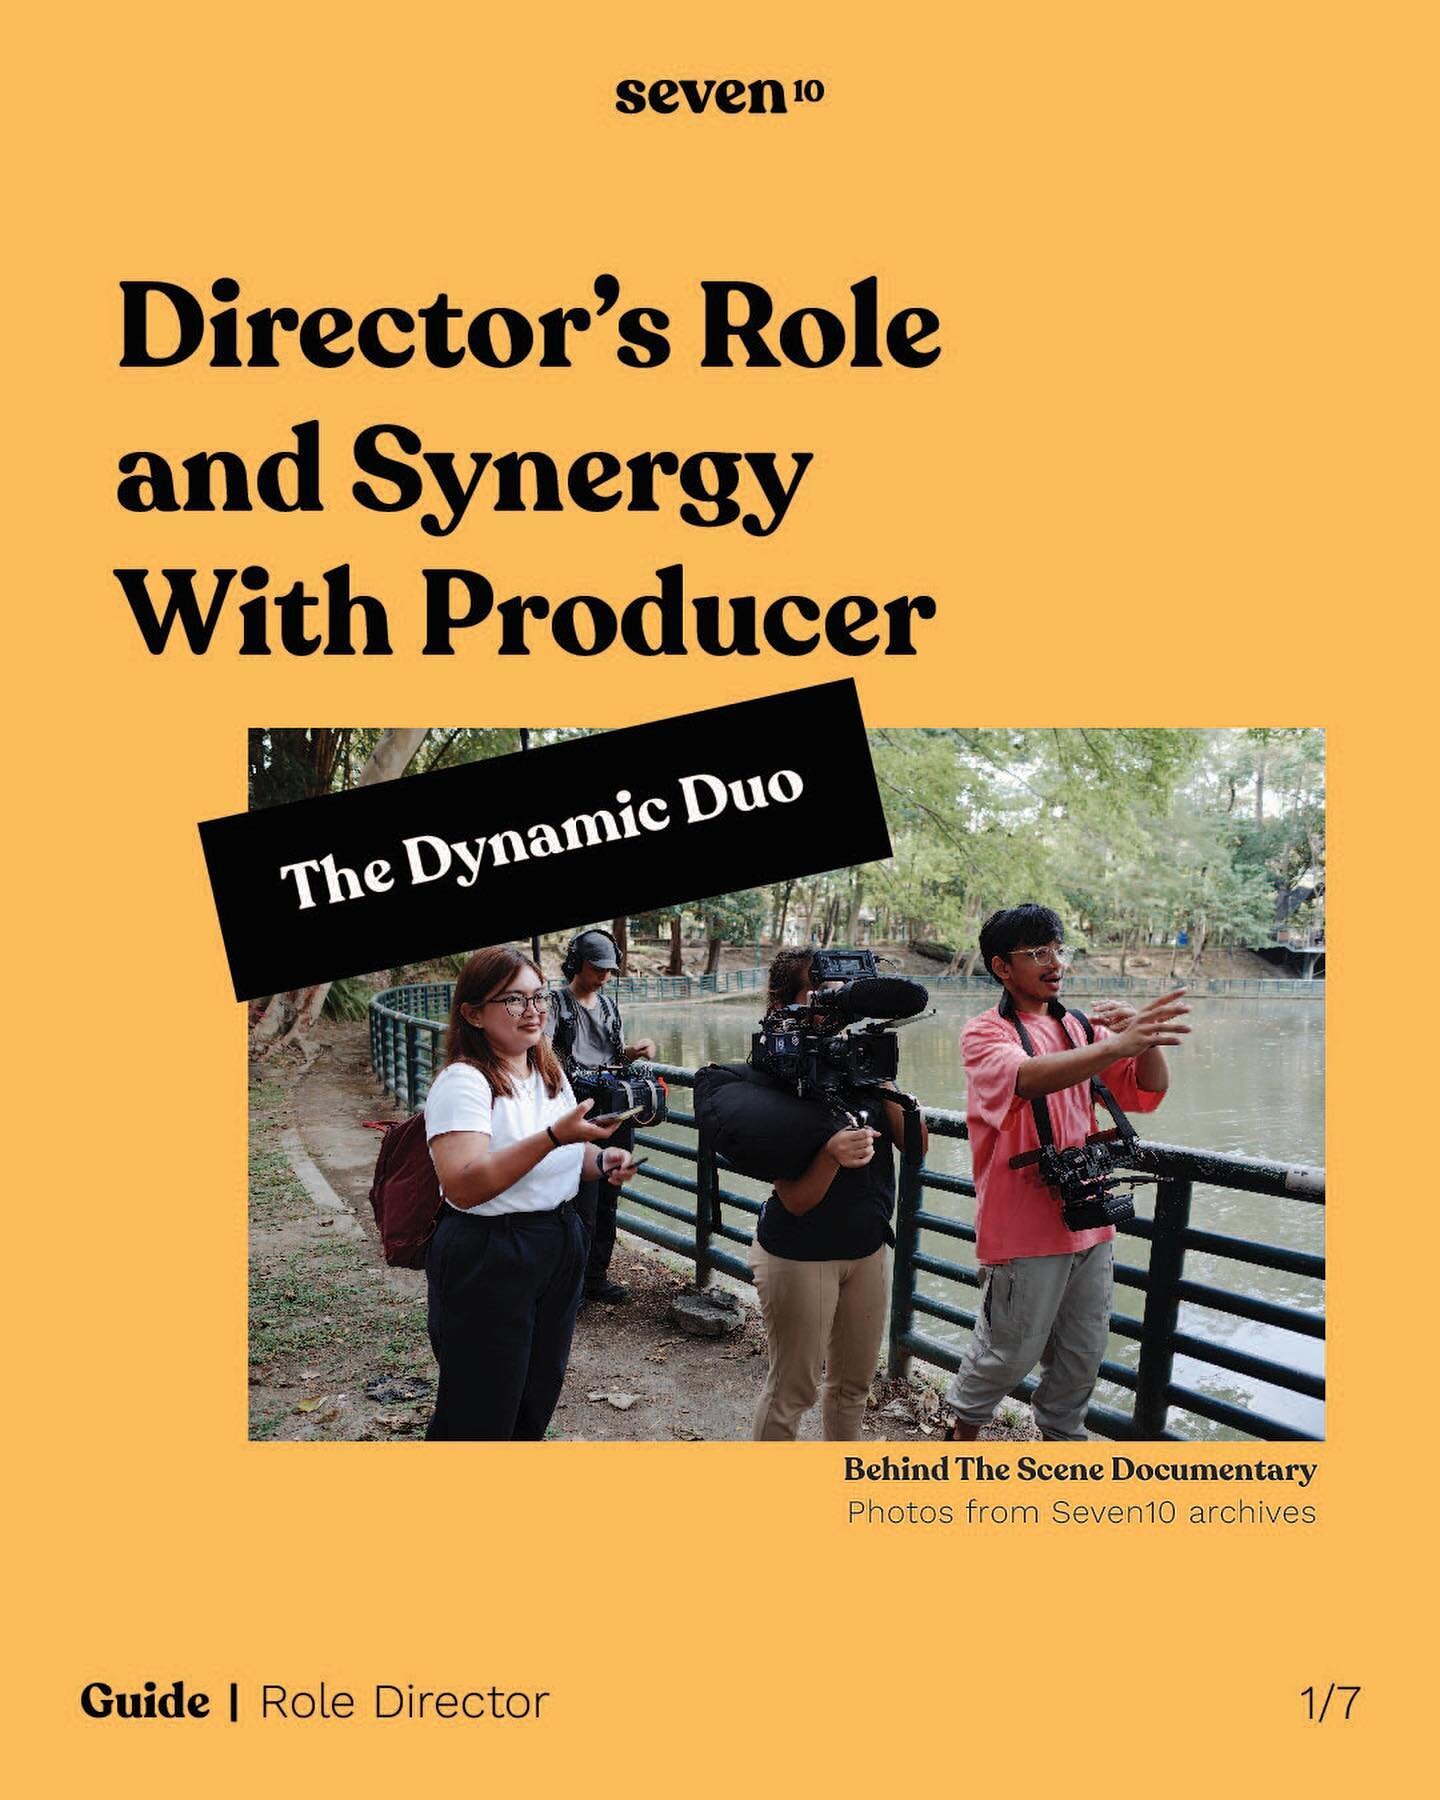 It turns out you don't need to be an expert in everything to become a film director. What matters most is being able to effectively communicate your vision to everyone involved in the filmmaking process. Directors and producers work together, complem